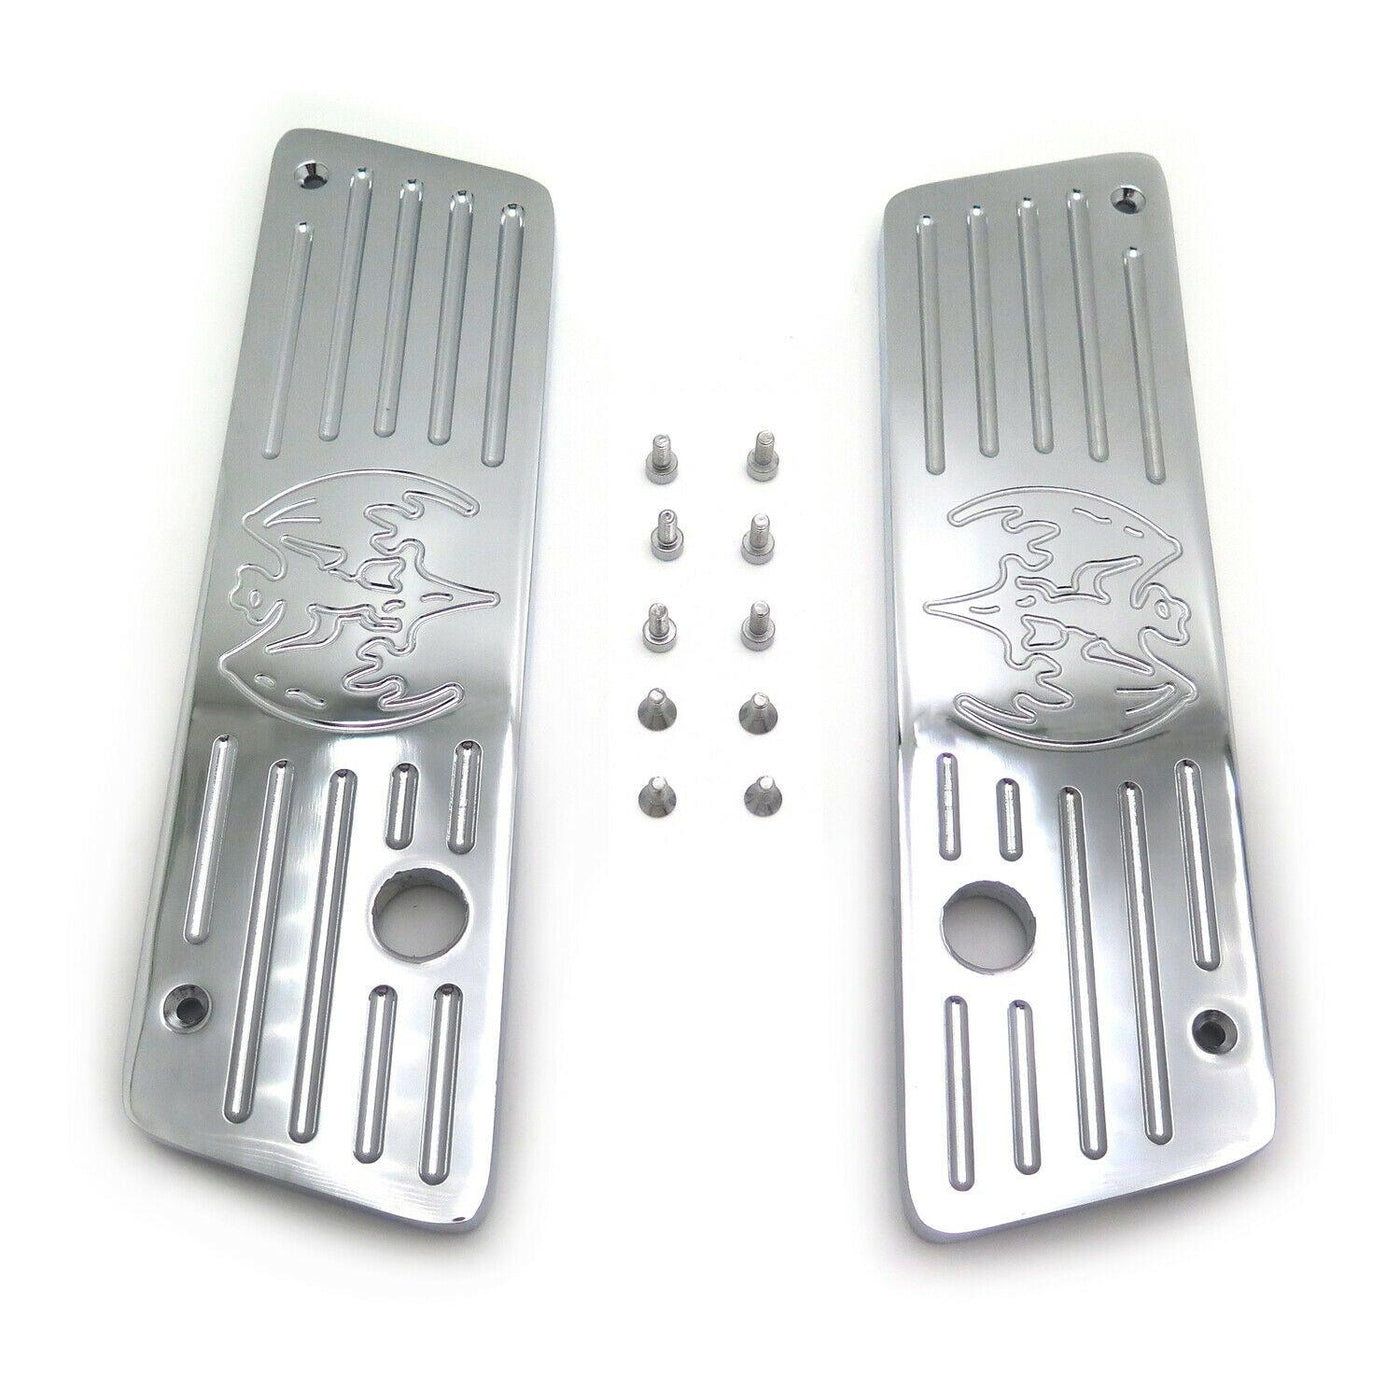 Contrast Deep CNC Cut Saddlebag Latches Cover For Harley Touring 1993-2013 FL - Moto Life Products